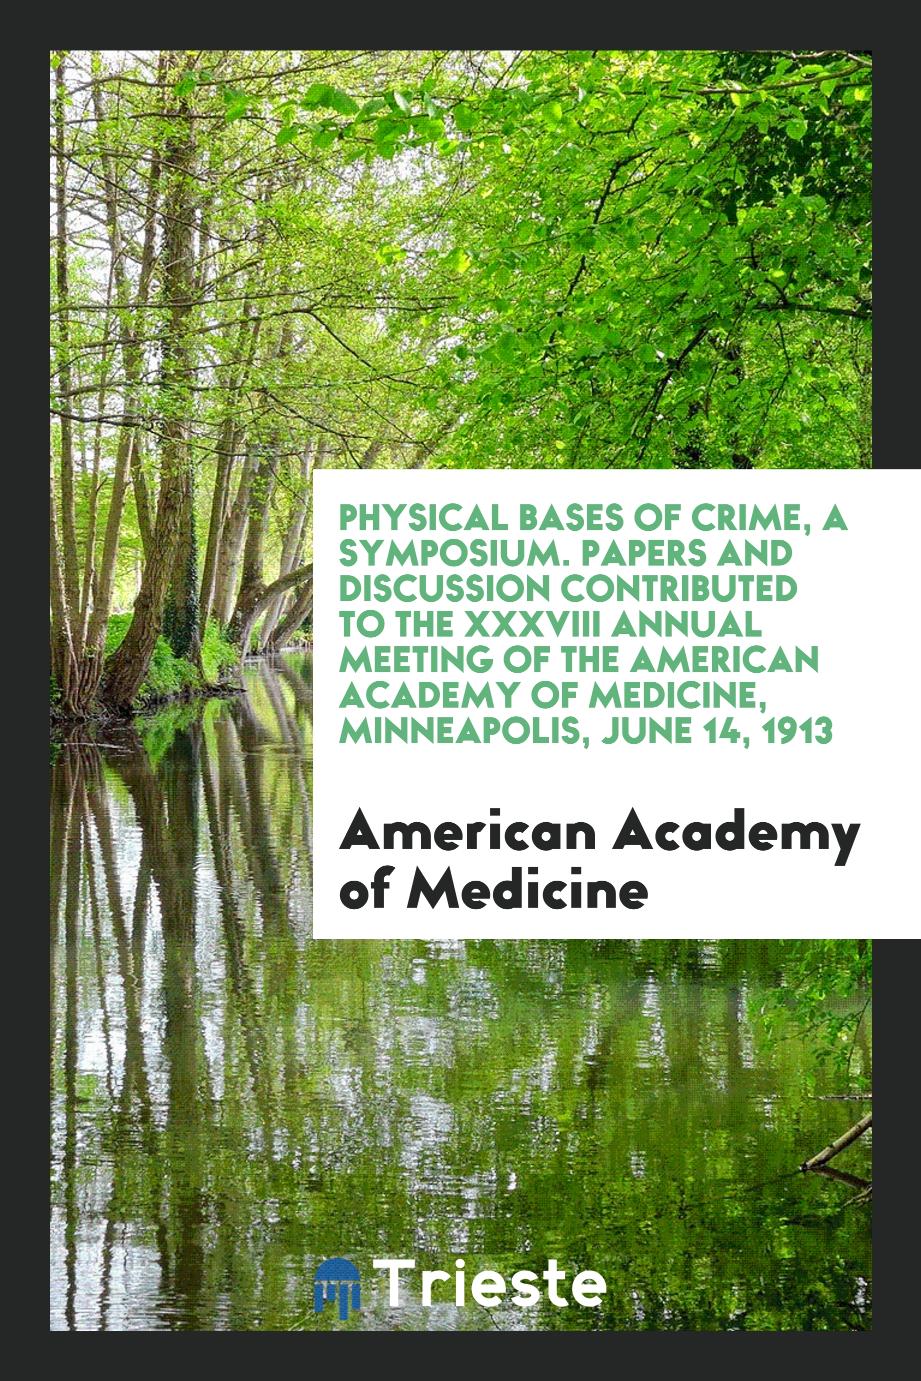 Physical Bases of Crime, a Symposium. Papers and Discussion Contributed to the XXXVIII Annual Meeting of the American Academy of Medicine, Minneapolis, June 14, 1913